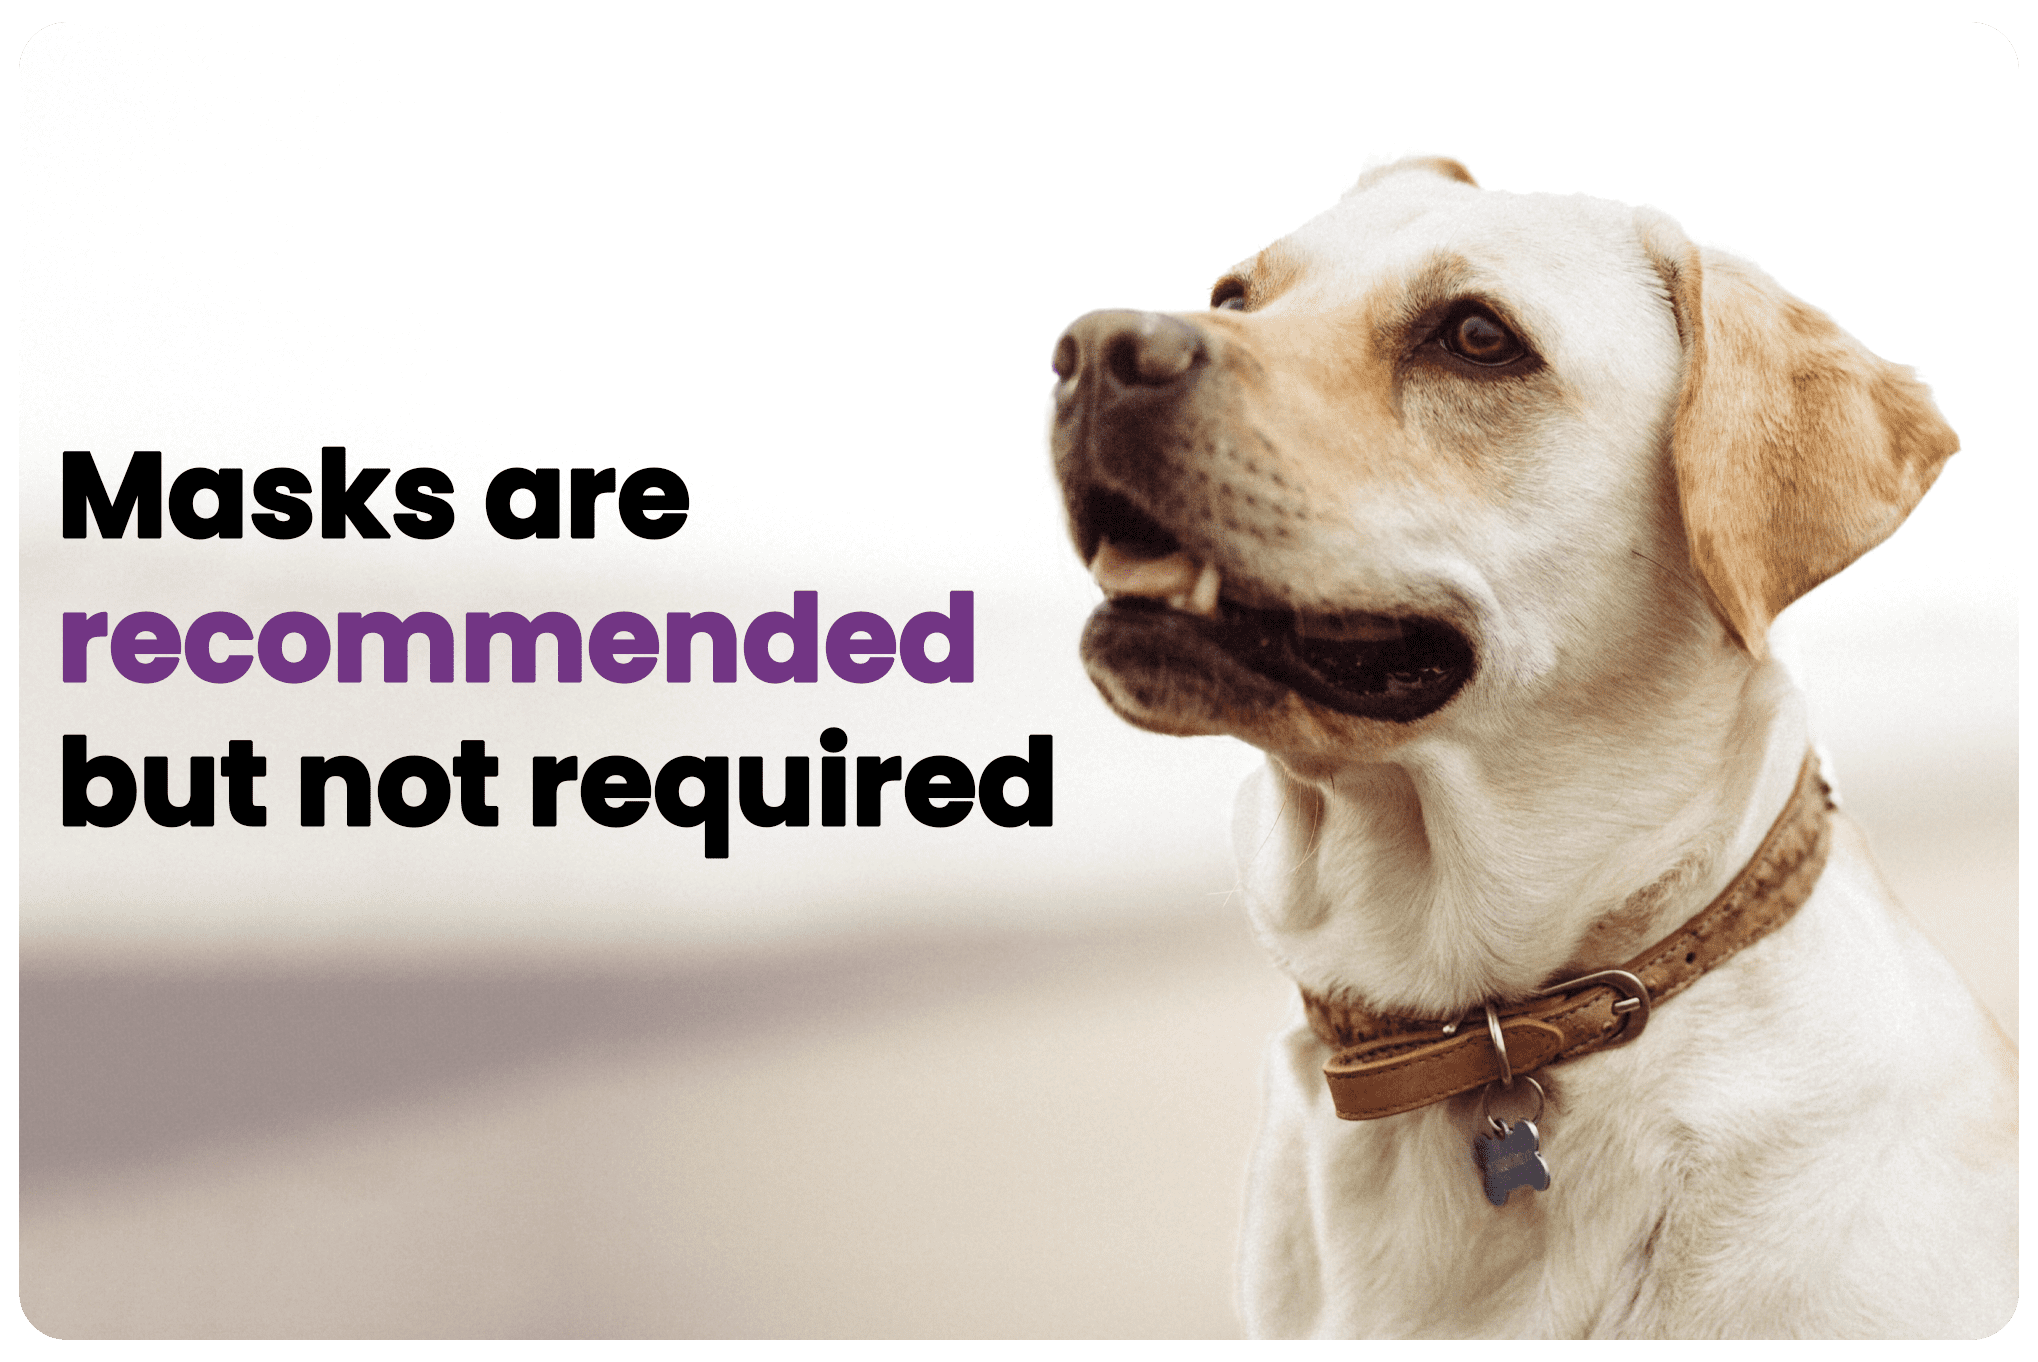 Masks are recommended but not required.